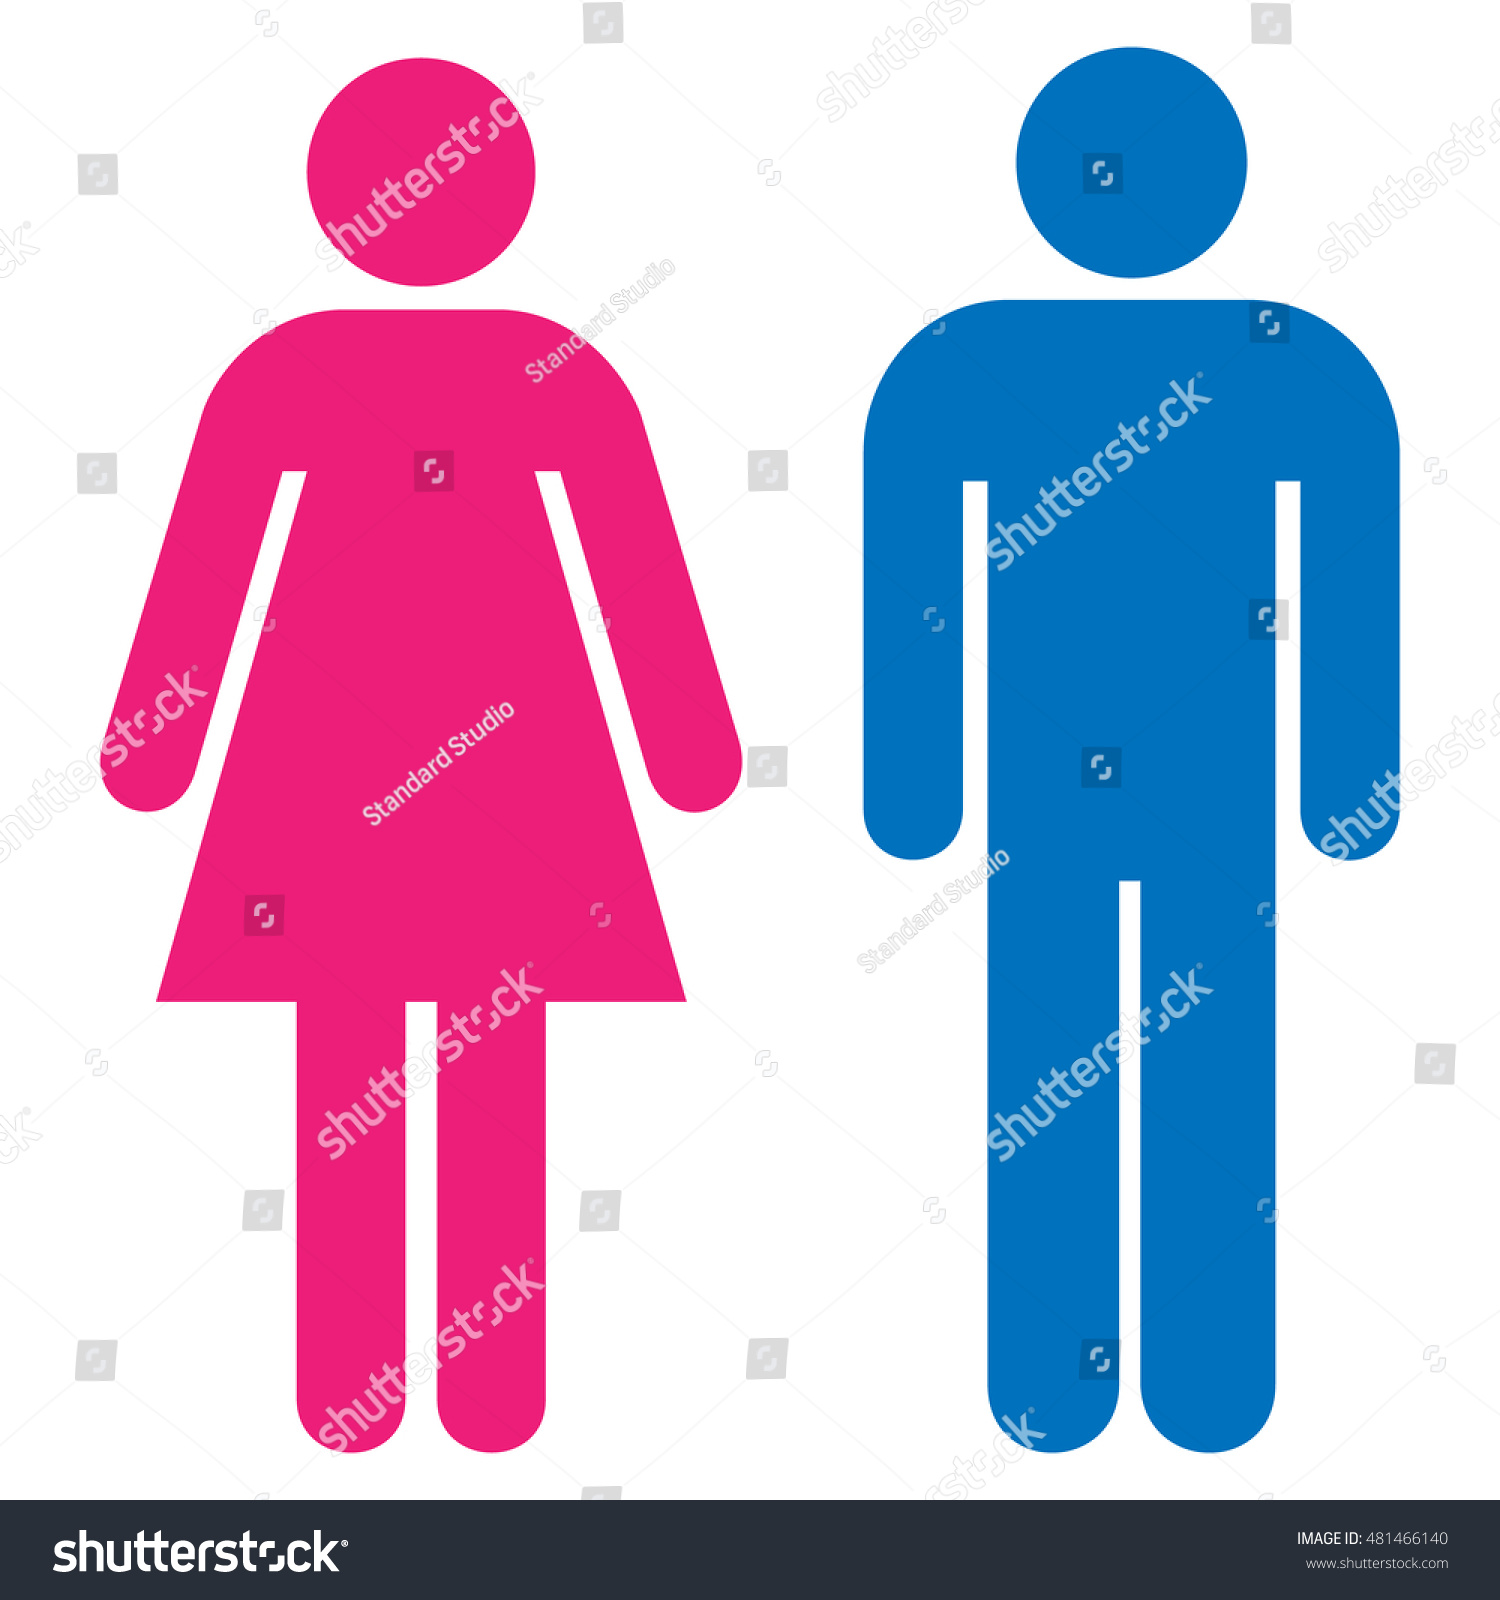 Restroom Sign Man Lady Toilet Sign Stock Vector (Royalty Free ...